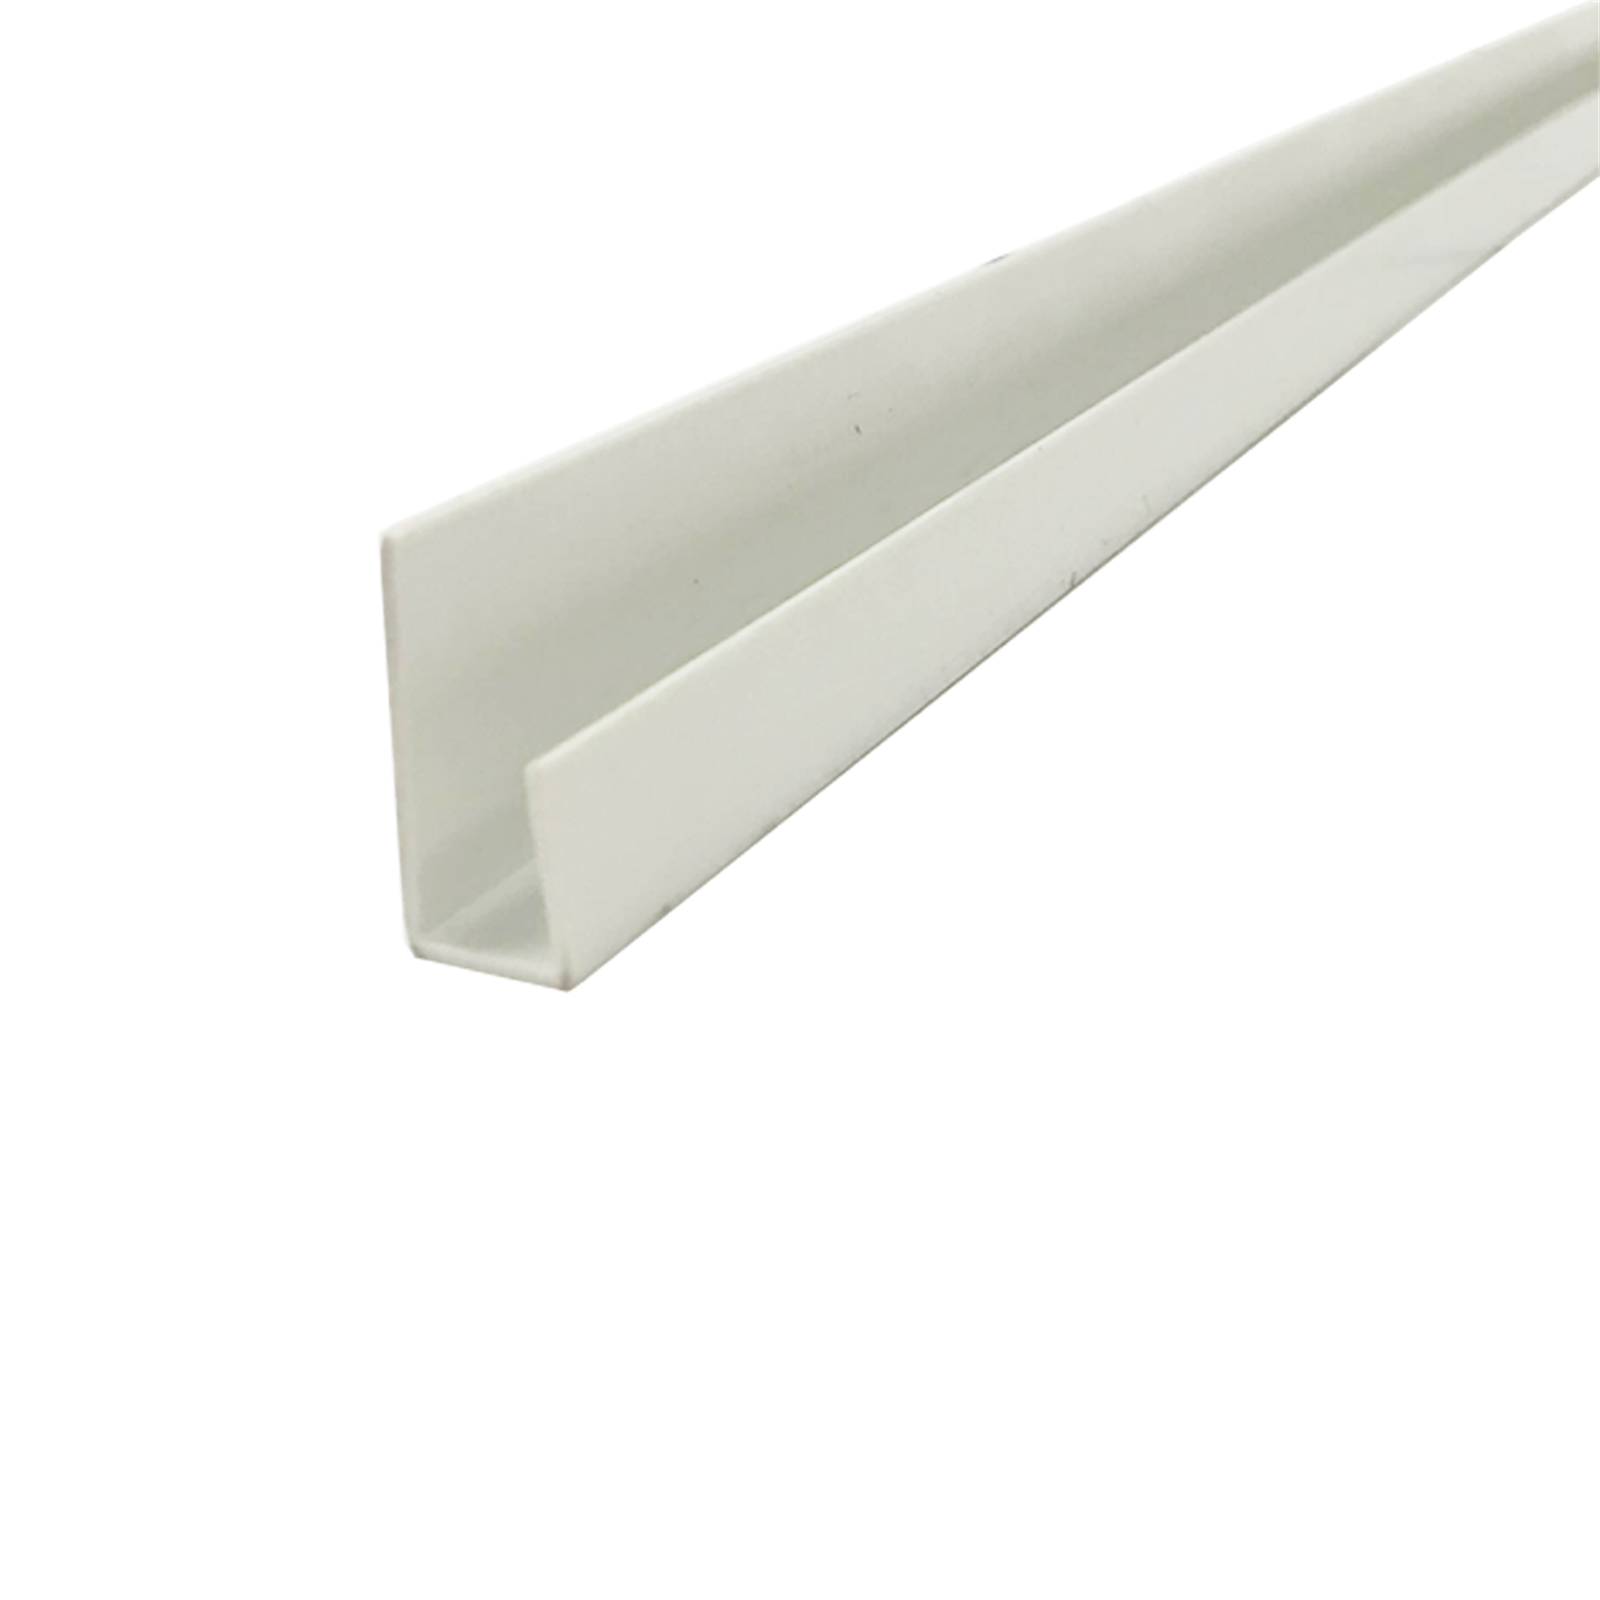 Brutus 6mm x 3m Building Moulding Capping